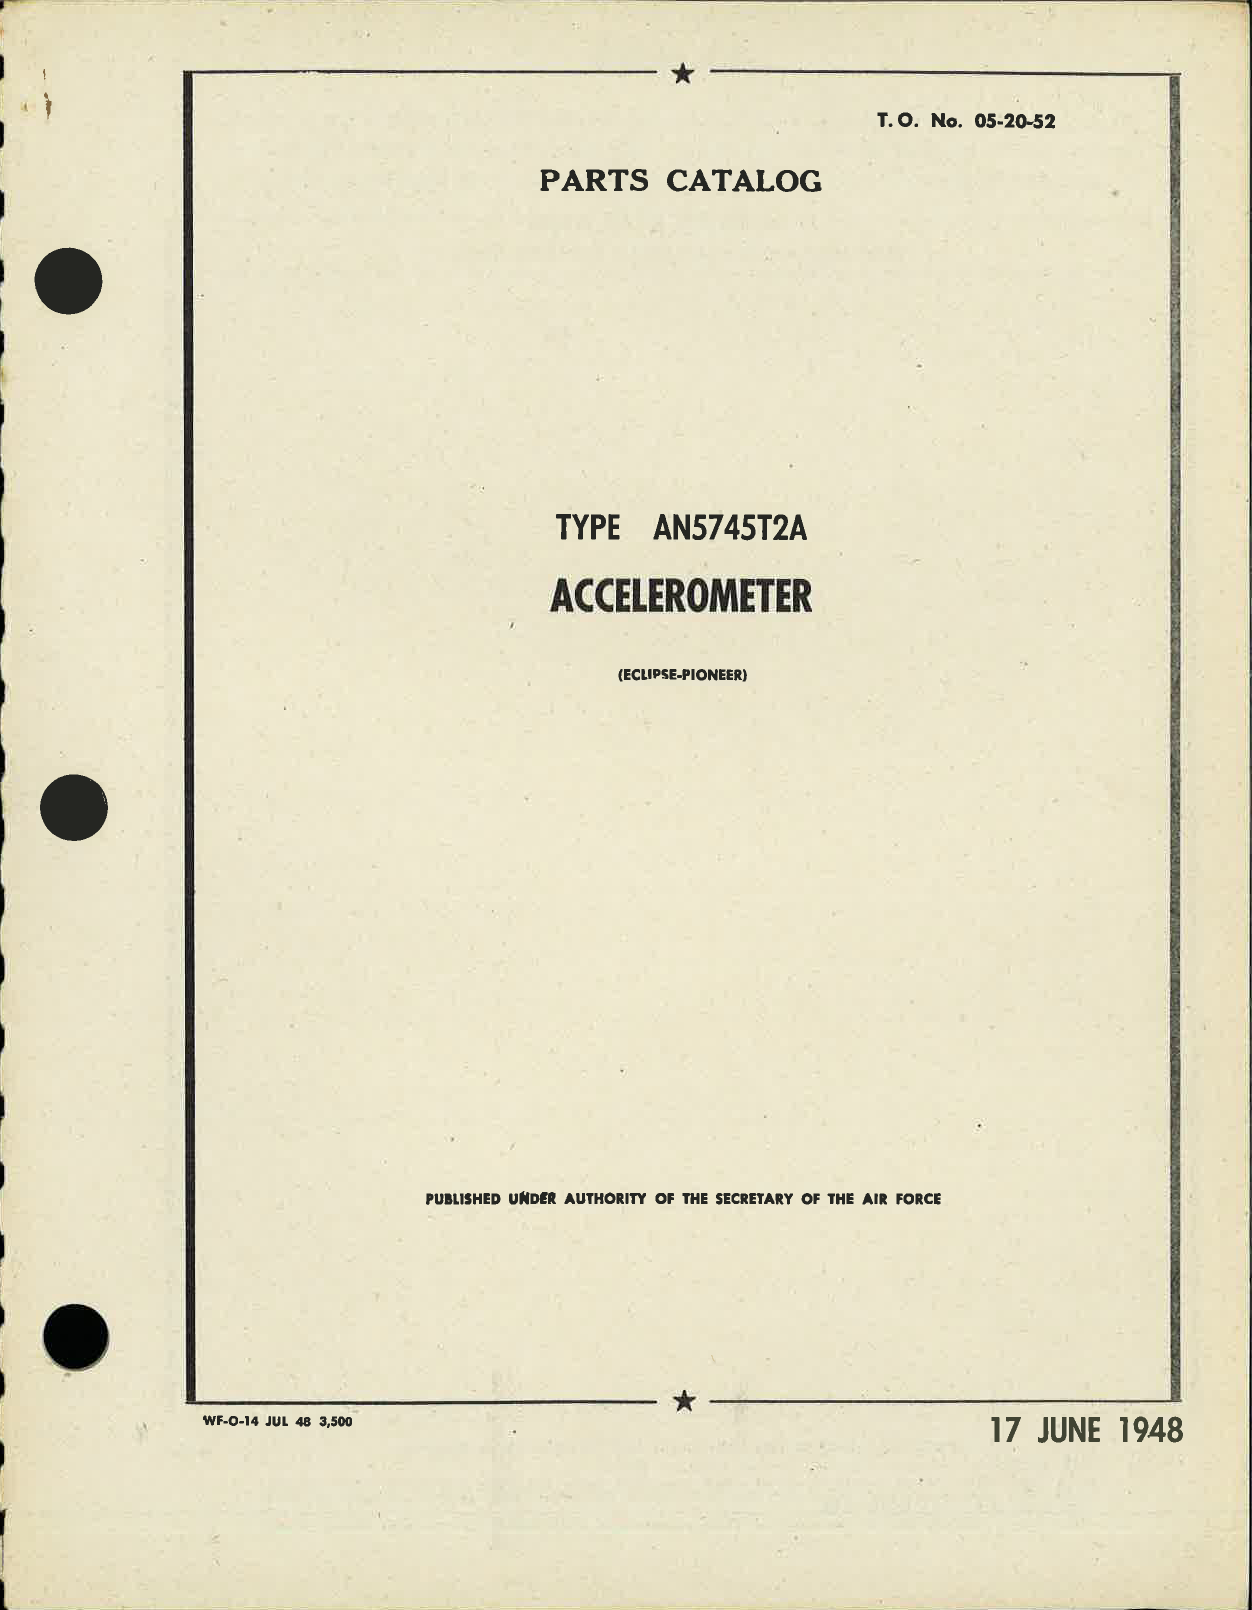 Sample page 1 from AirCorps Library document: Parts Catalog for Type AN5745T2A Accelerometer